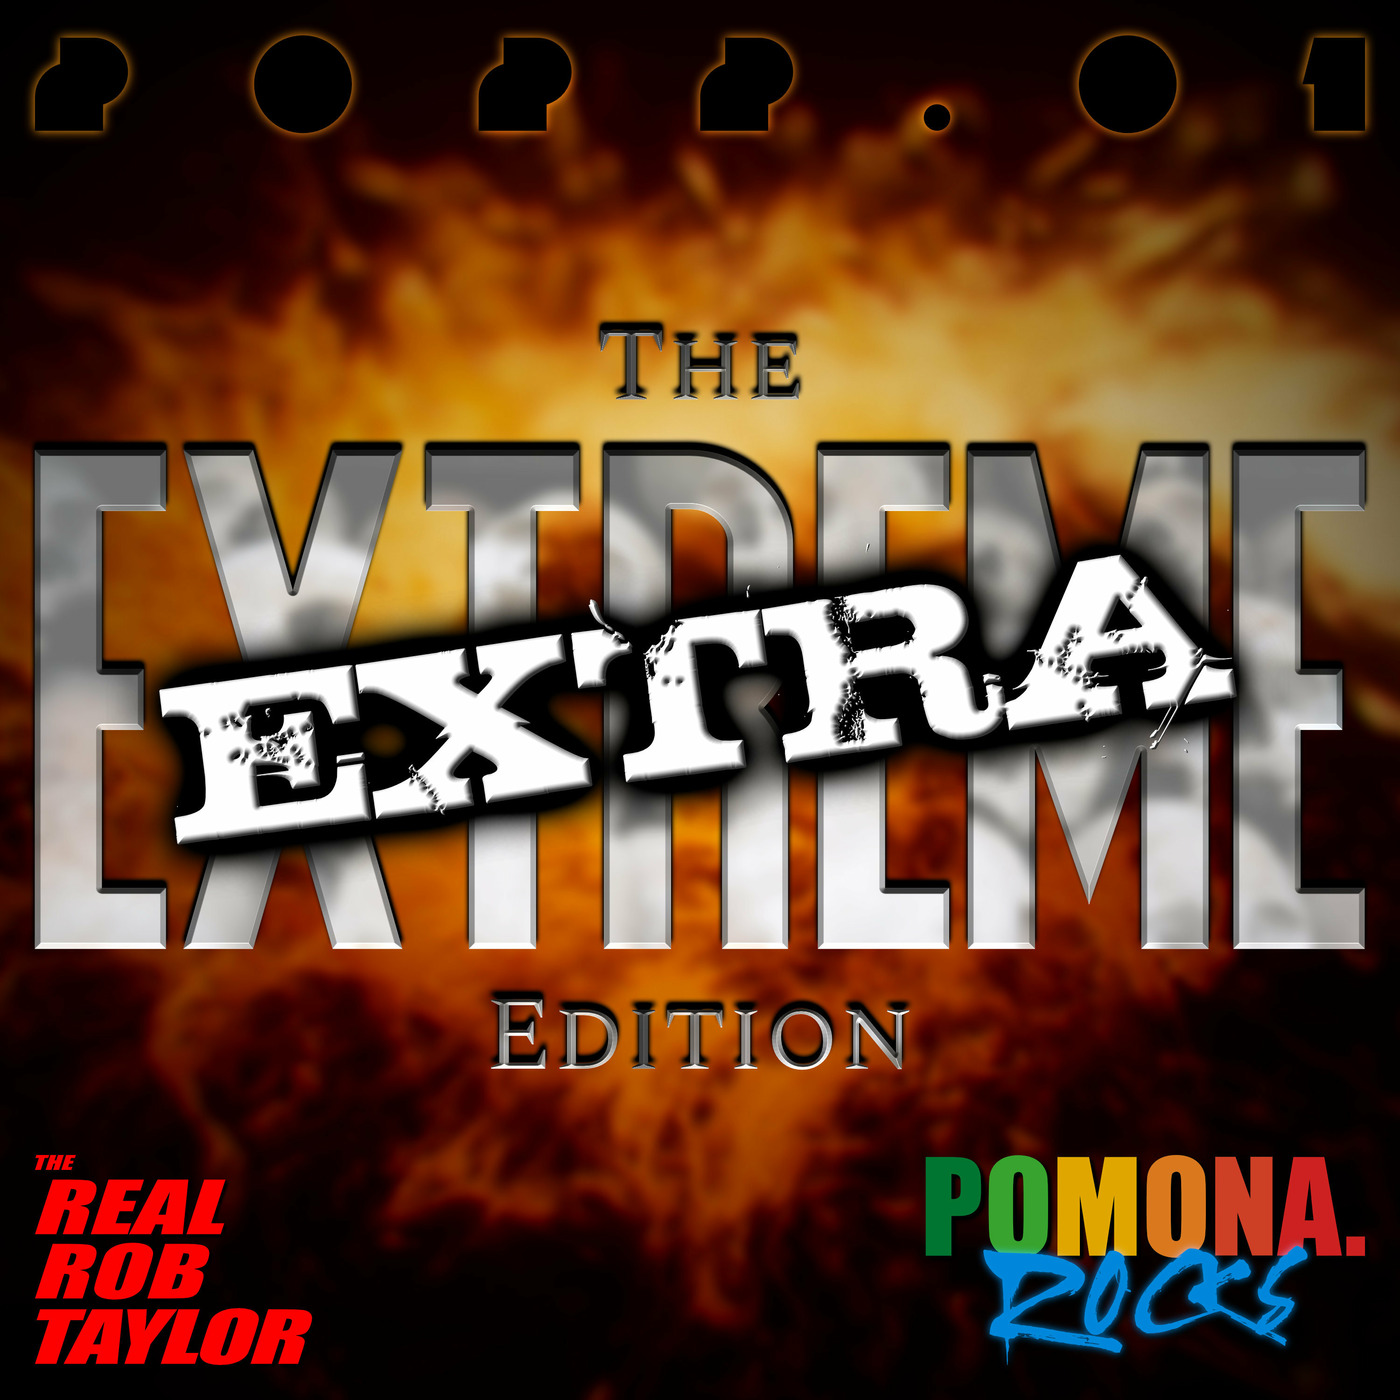 The EXTREME EDITION: EXTRA 2022.01 | FREE EDITION